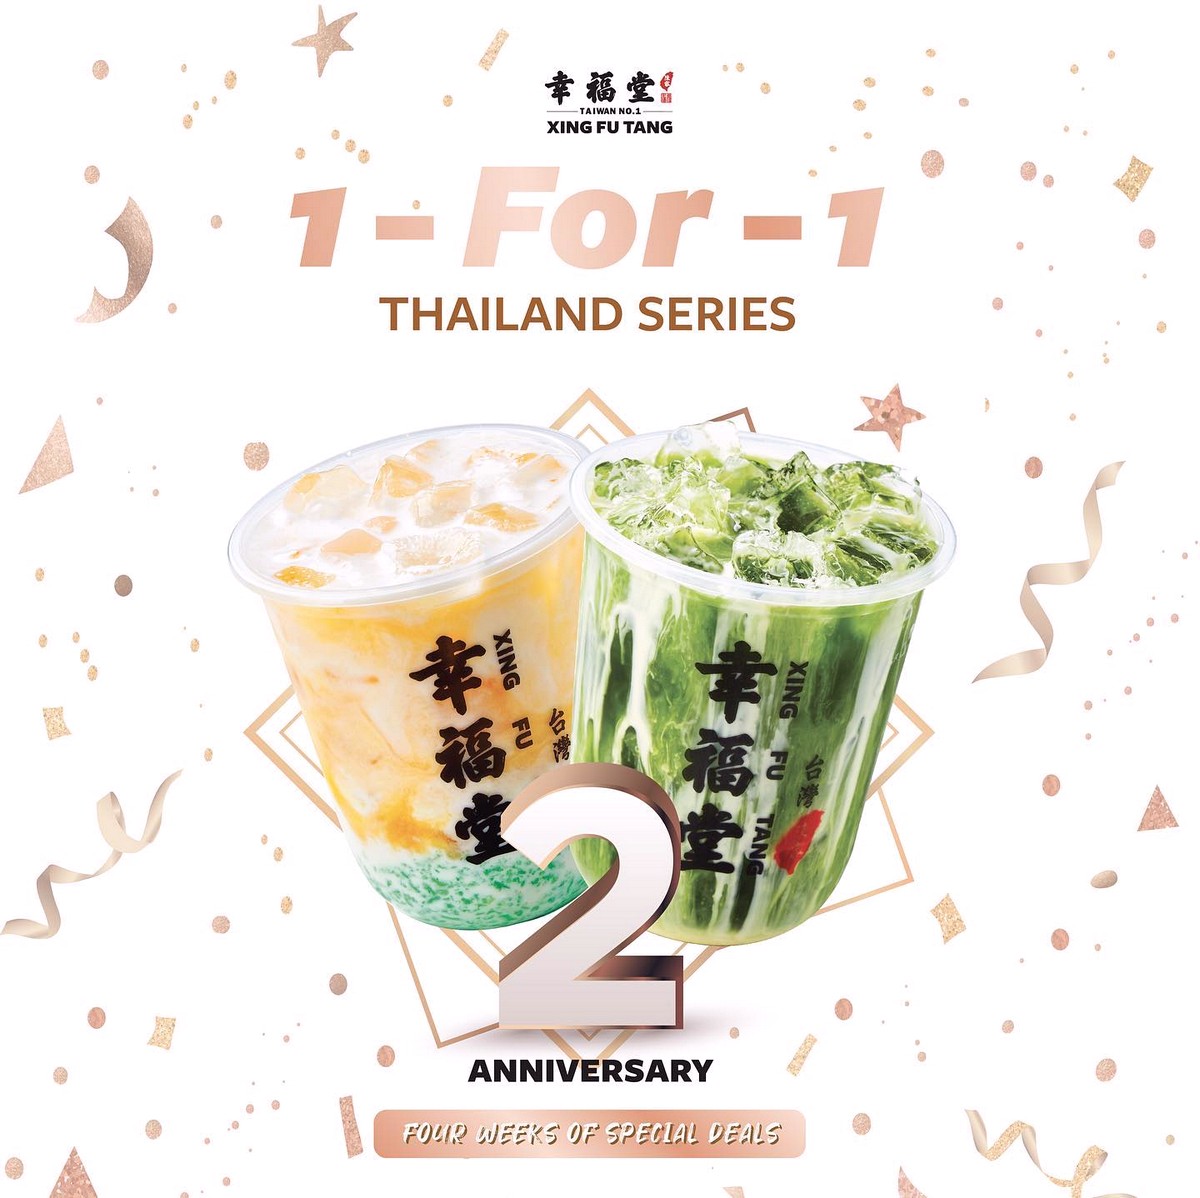 Xing-Fu-Tang-celebrates-2nd-birthday-anniversary-Promotion-Singapore-with-1-for-1-Offers-deal-till-30-Jun-2021-Warehouse-Sale-Clearance 1-30 Jun 2021: Xing Fu Tang Happy 2nd Birthday 1-For-1 Promo on Thailand Series Milk Tea for Delivery & Takeaway at All Outlets in Singapore